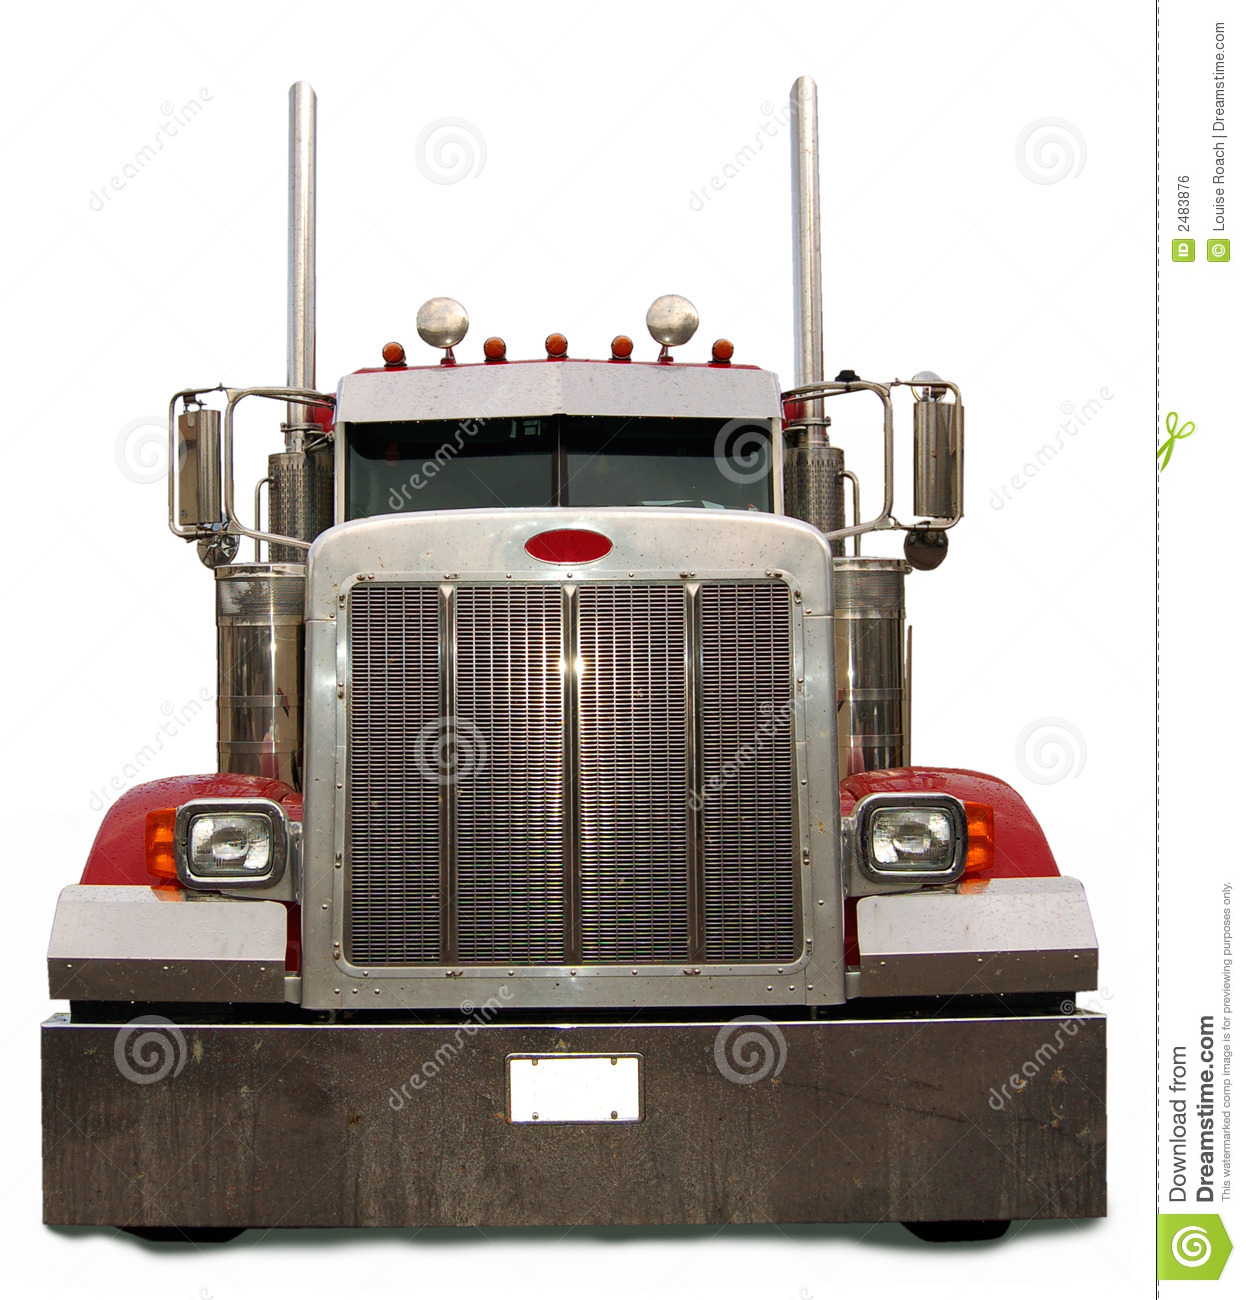 Red Semi Truck Royalty Free Stock Image   Image  2483876